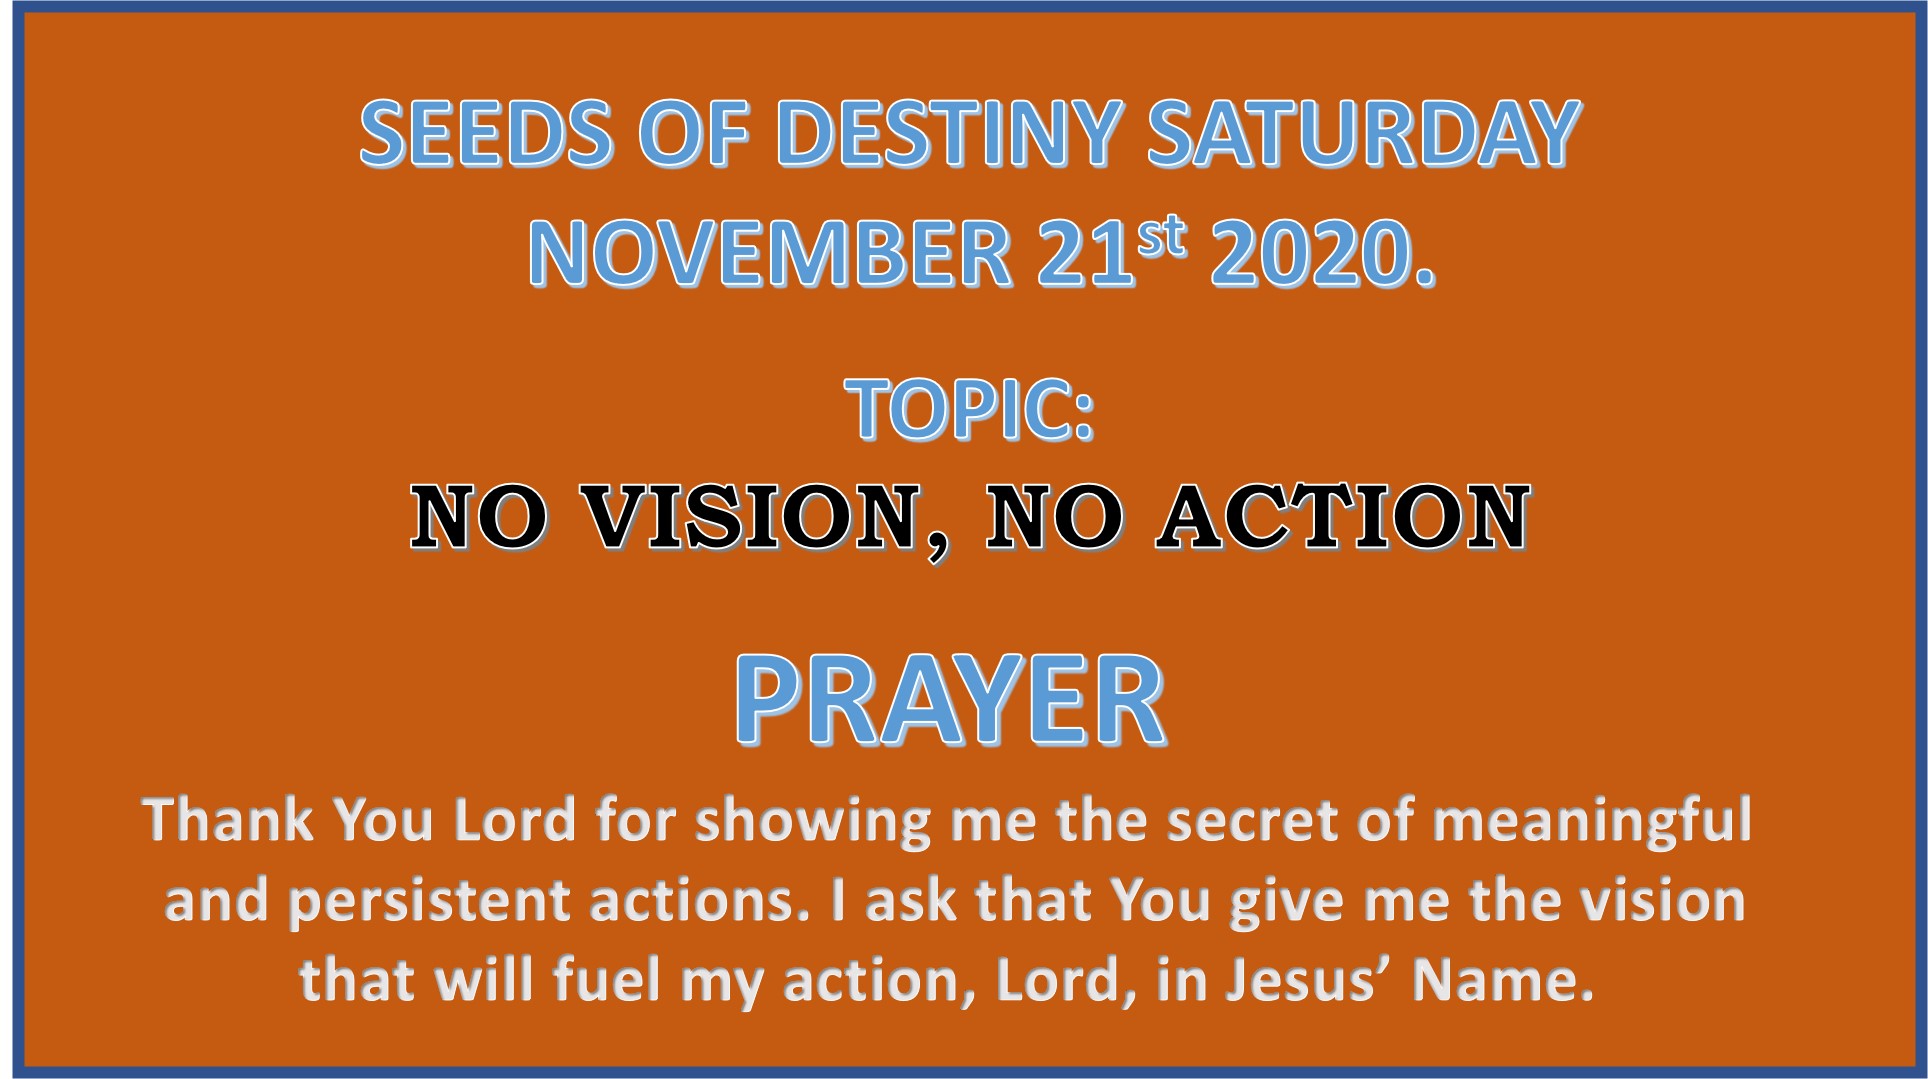 Seeds of Destiny Saturday 21st November 2020 by Dr Paul Enenche